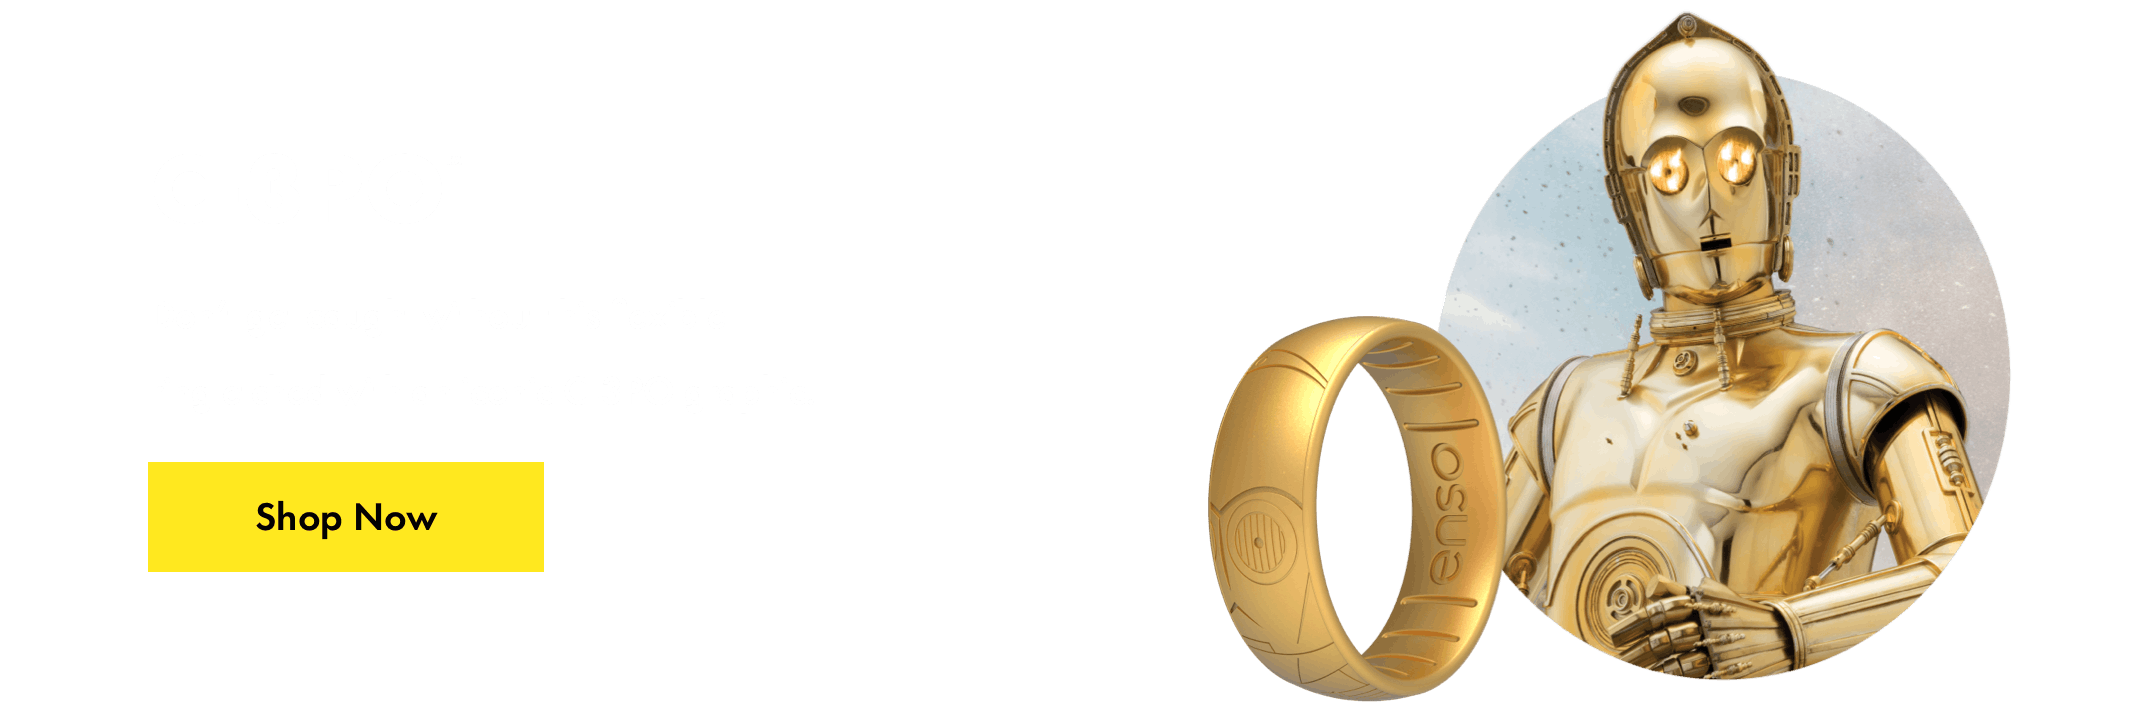 C-3PO™ ring. Don’t get caught without this flexible ring etched with an iconic C-3PO graphic. Click here to shop now.